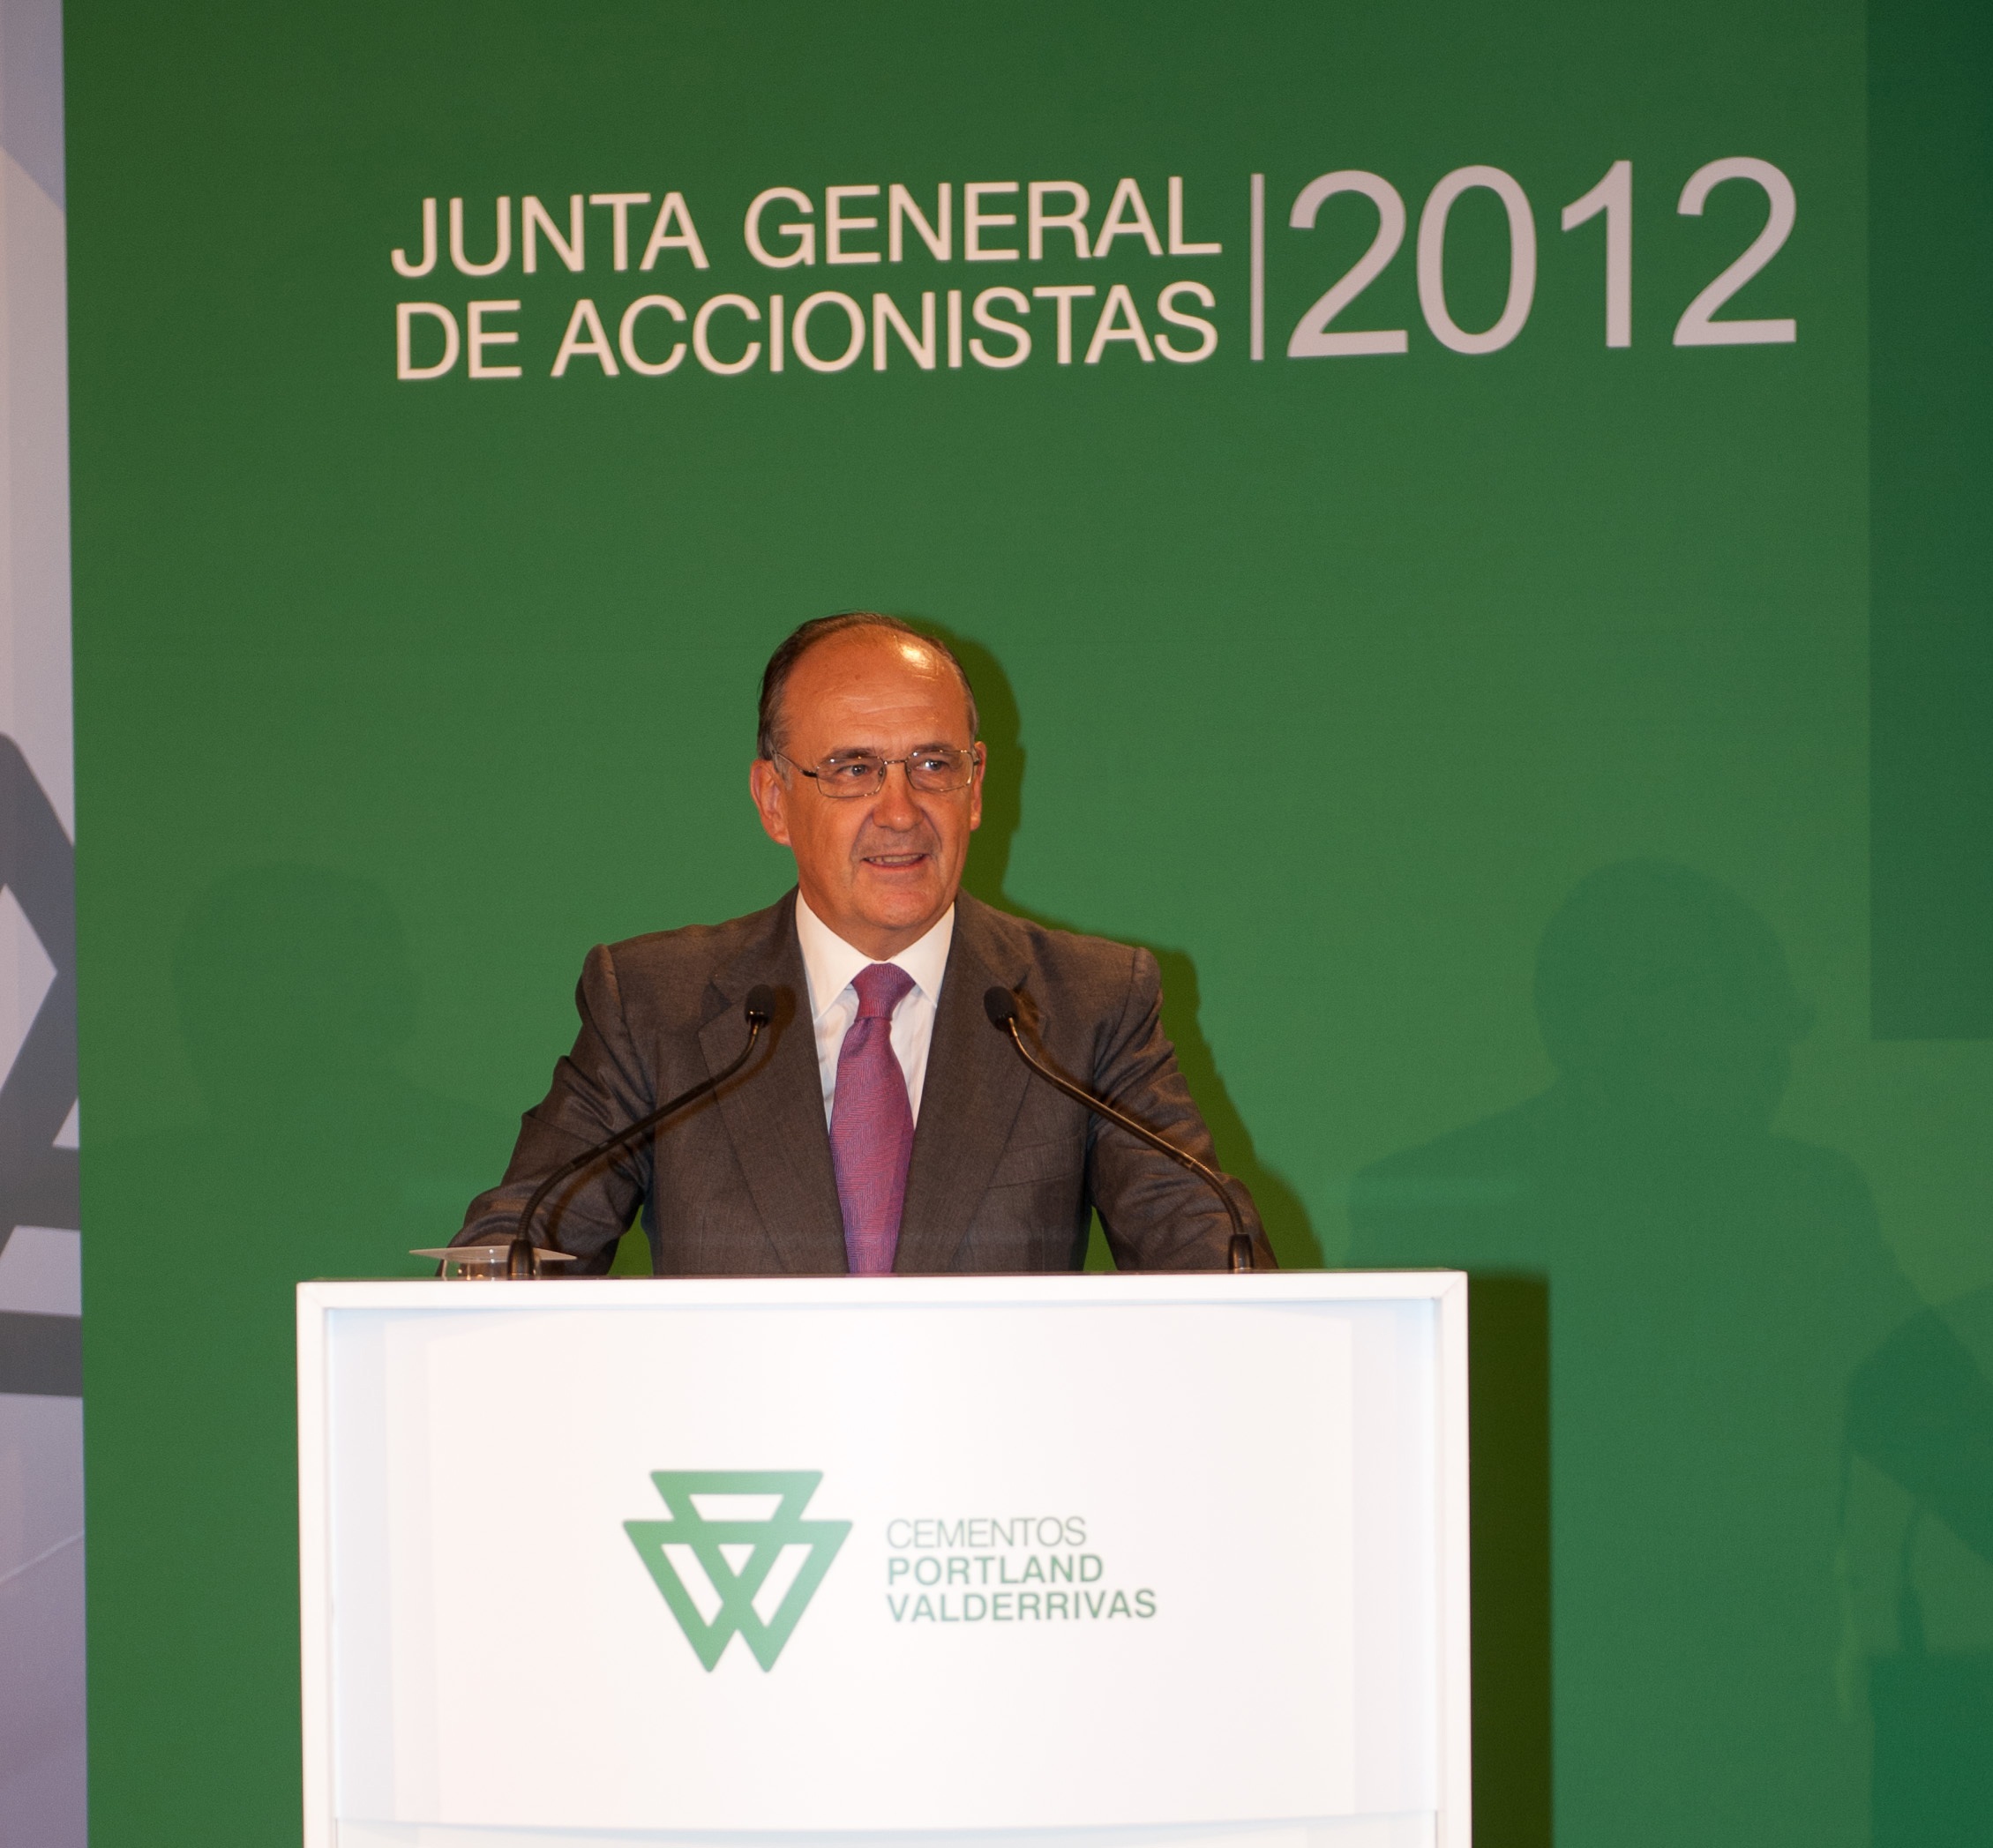 Cementos Portland Valderrivas expects a return to profits in 2013 through its Newval Plan